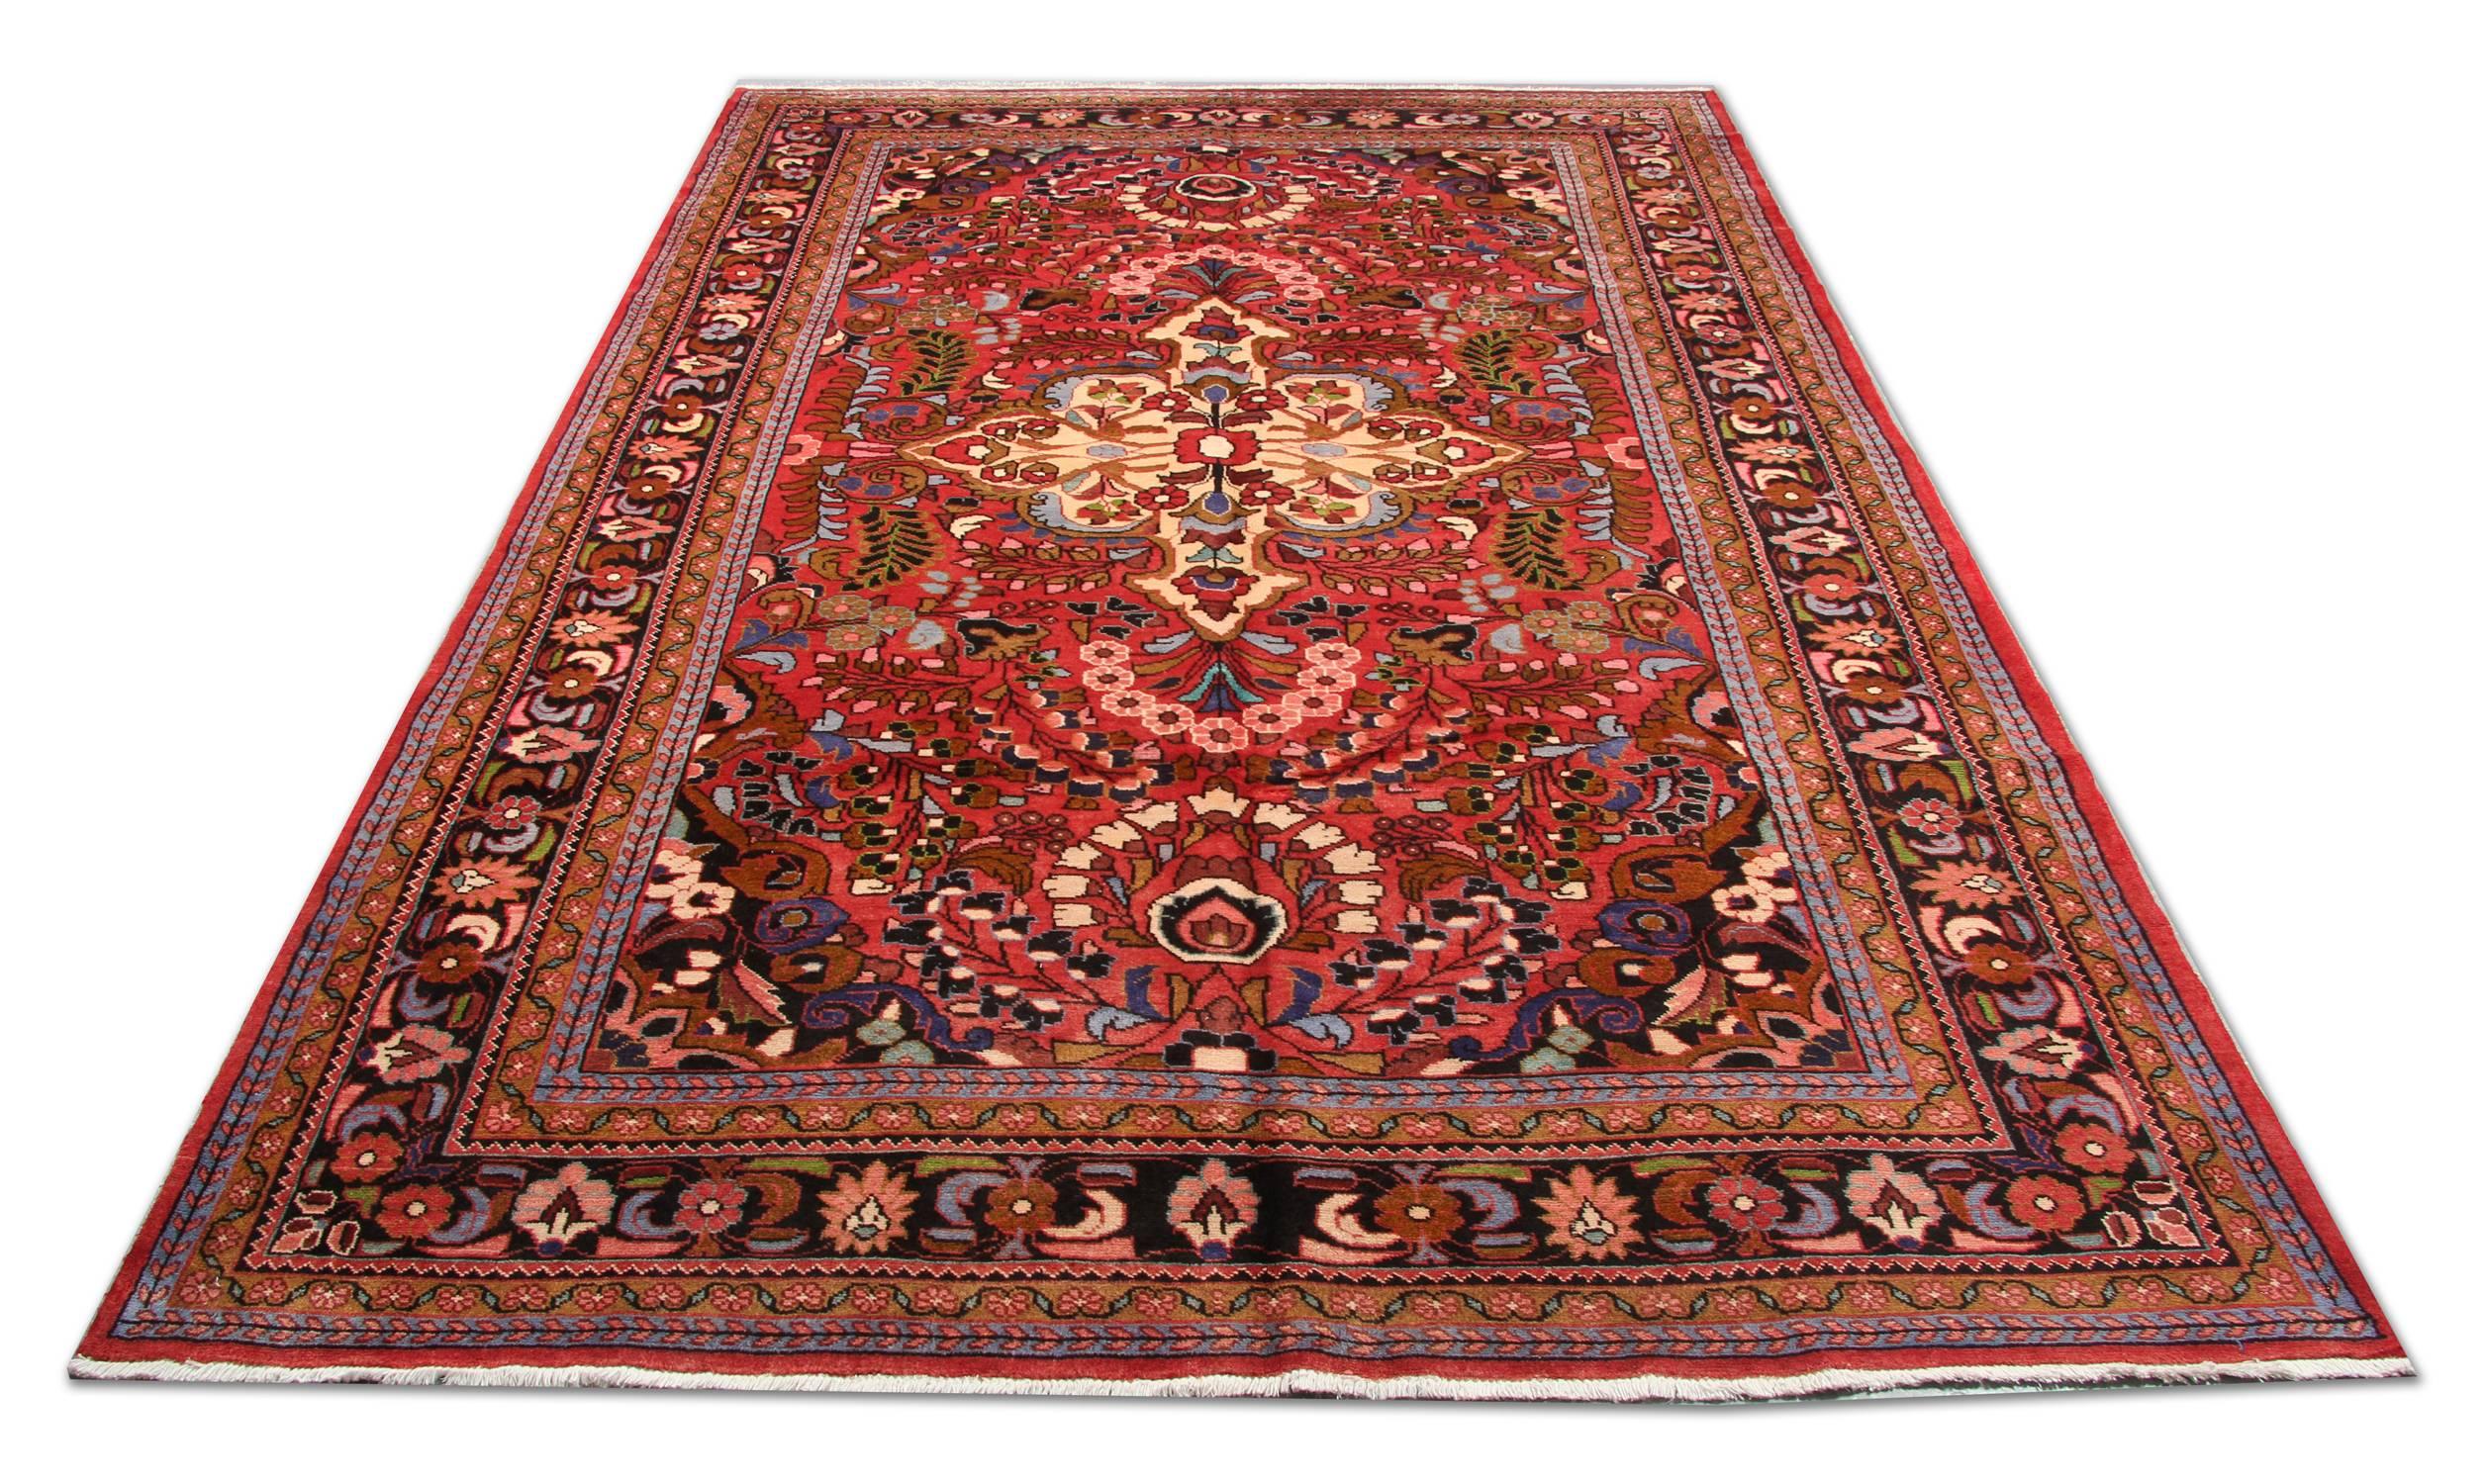 This oriental wool rug has been woven with a highly-decorative, symmetrical floral design. Woven with a fantastic color palette including a red background with, pink, blue, ivory and beige accent colours. This is then framed by a decorative repeat